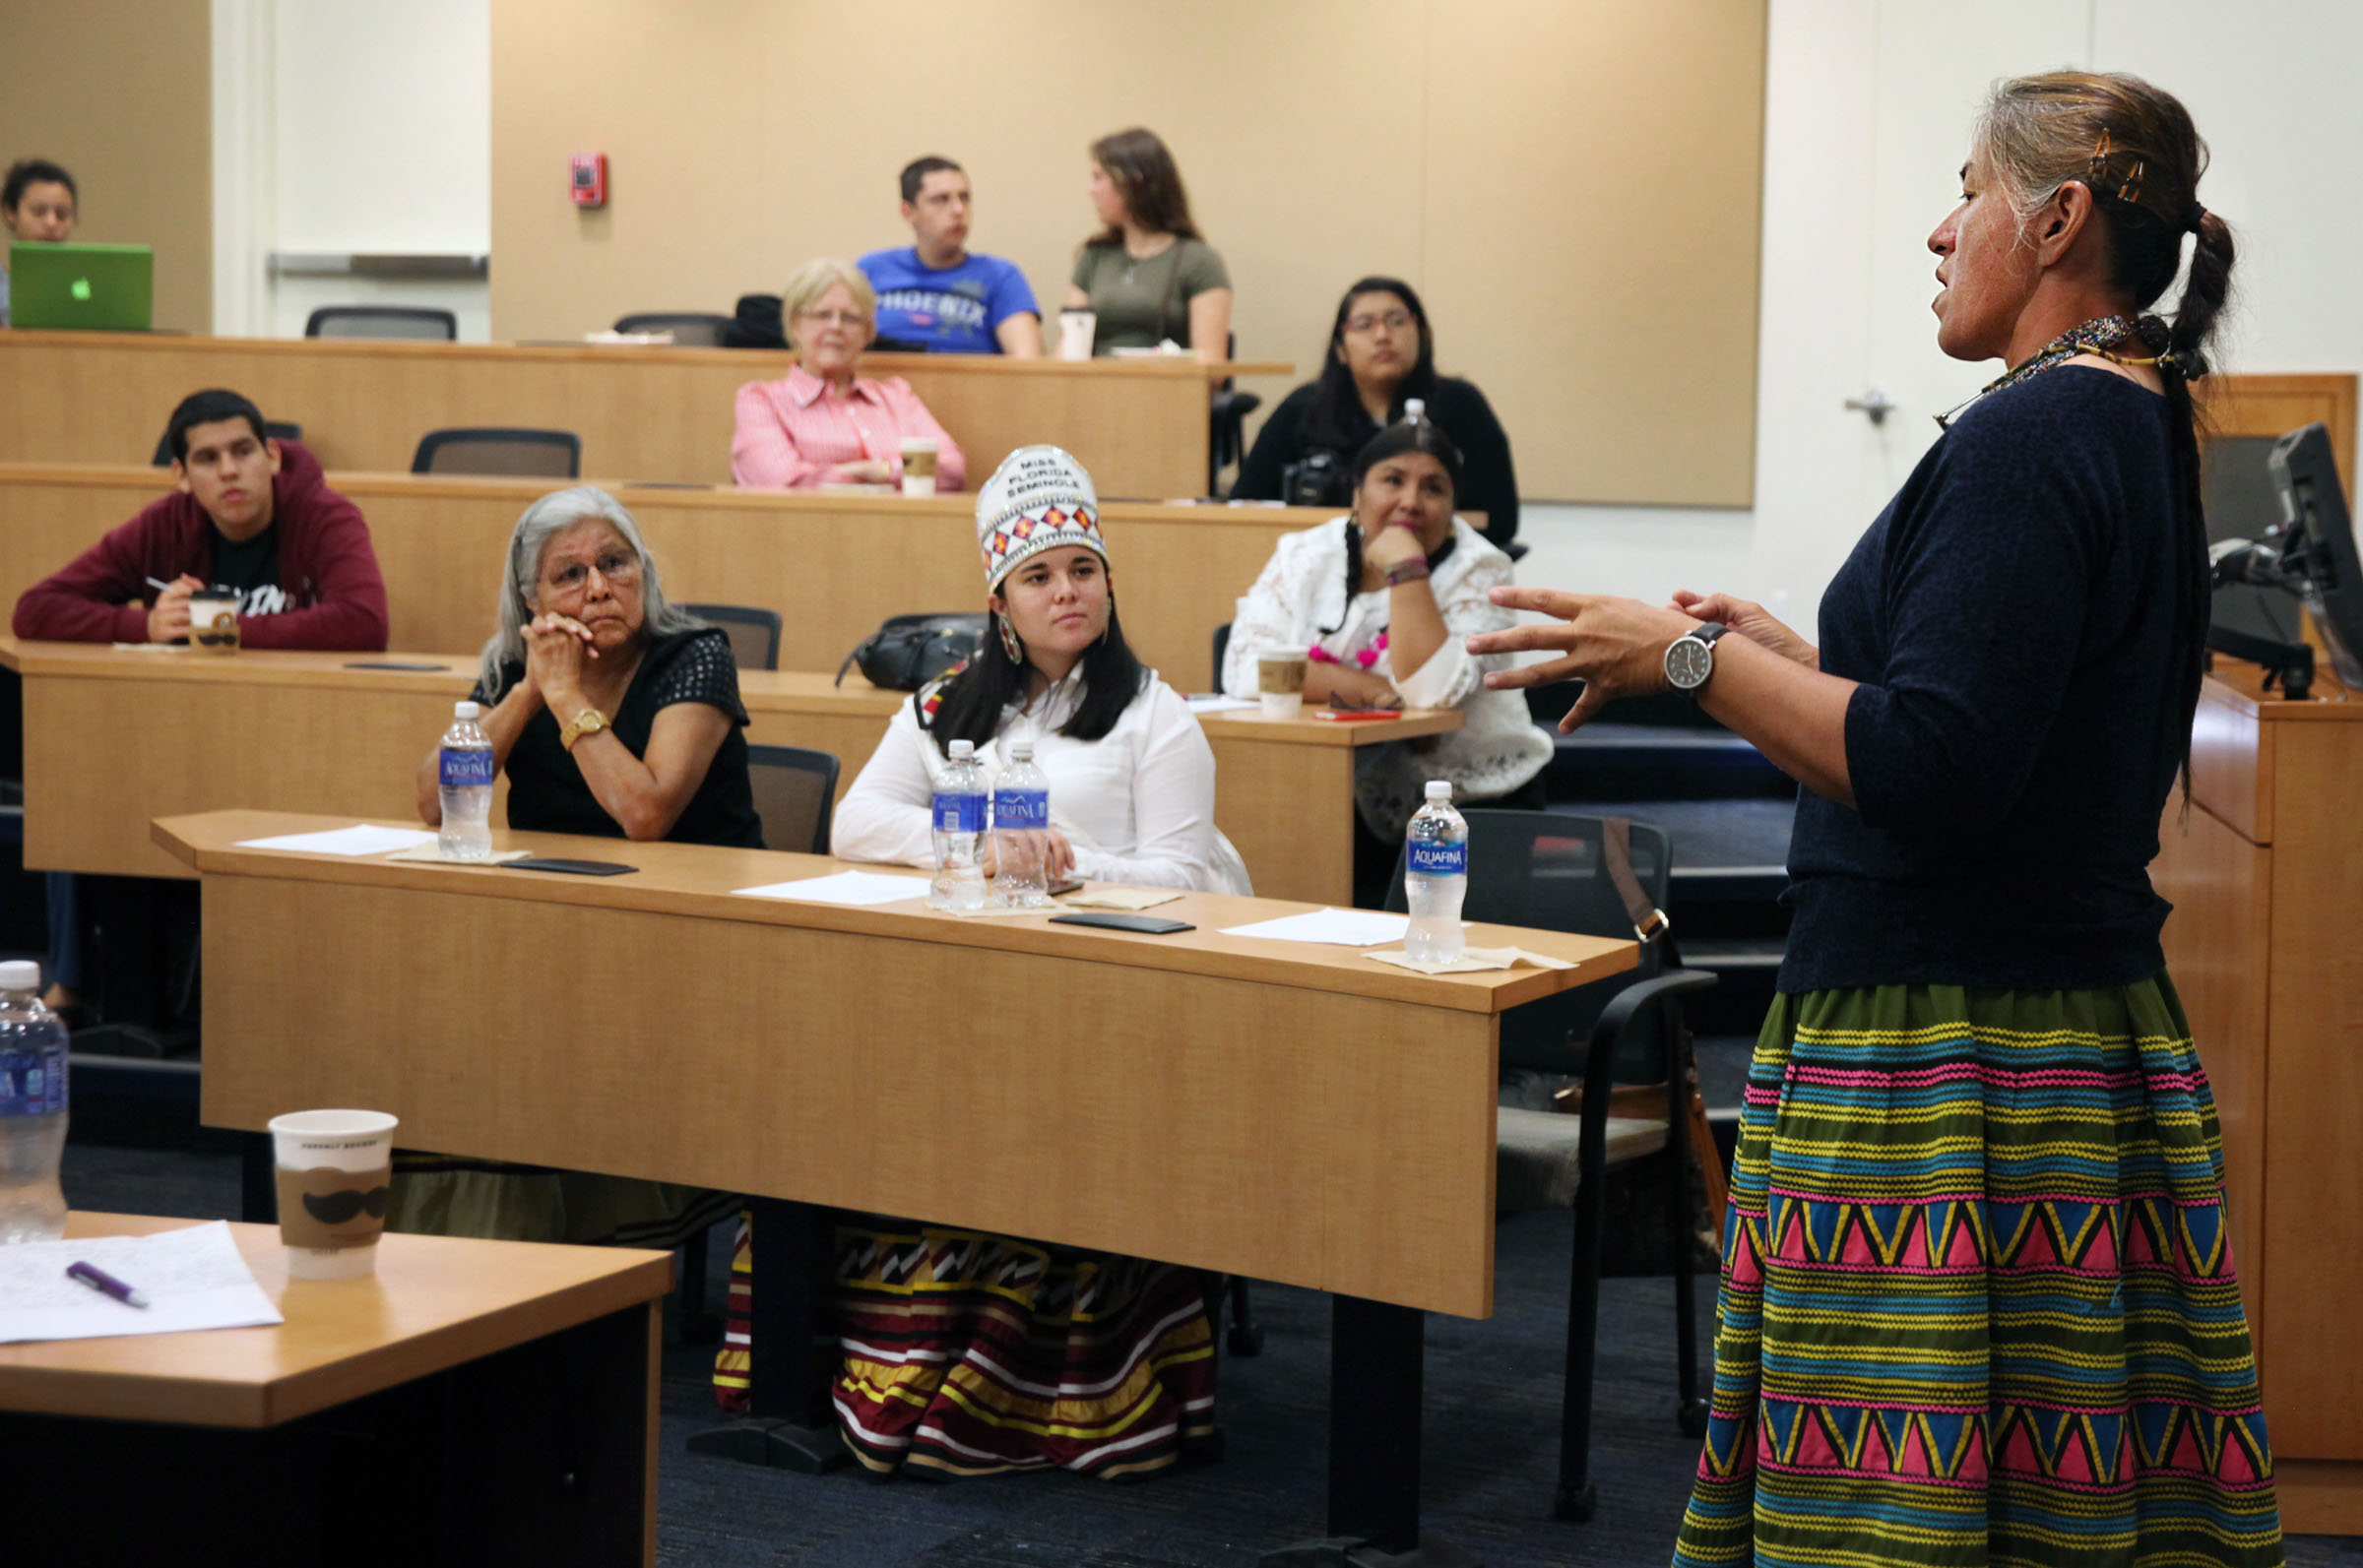 Florida International University students and guests listen March 29 while Miccosukee Tribe citizen Betty Osceola discusses environmental concerns during a Seminole and Miccosukee Women; Culture, Community, Family and Public Life session at the school’s Global Indigenous Forum.